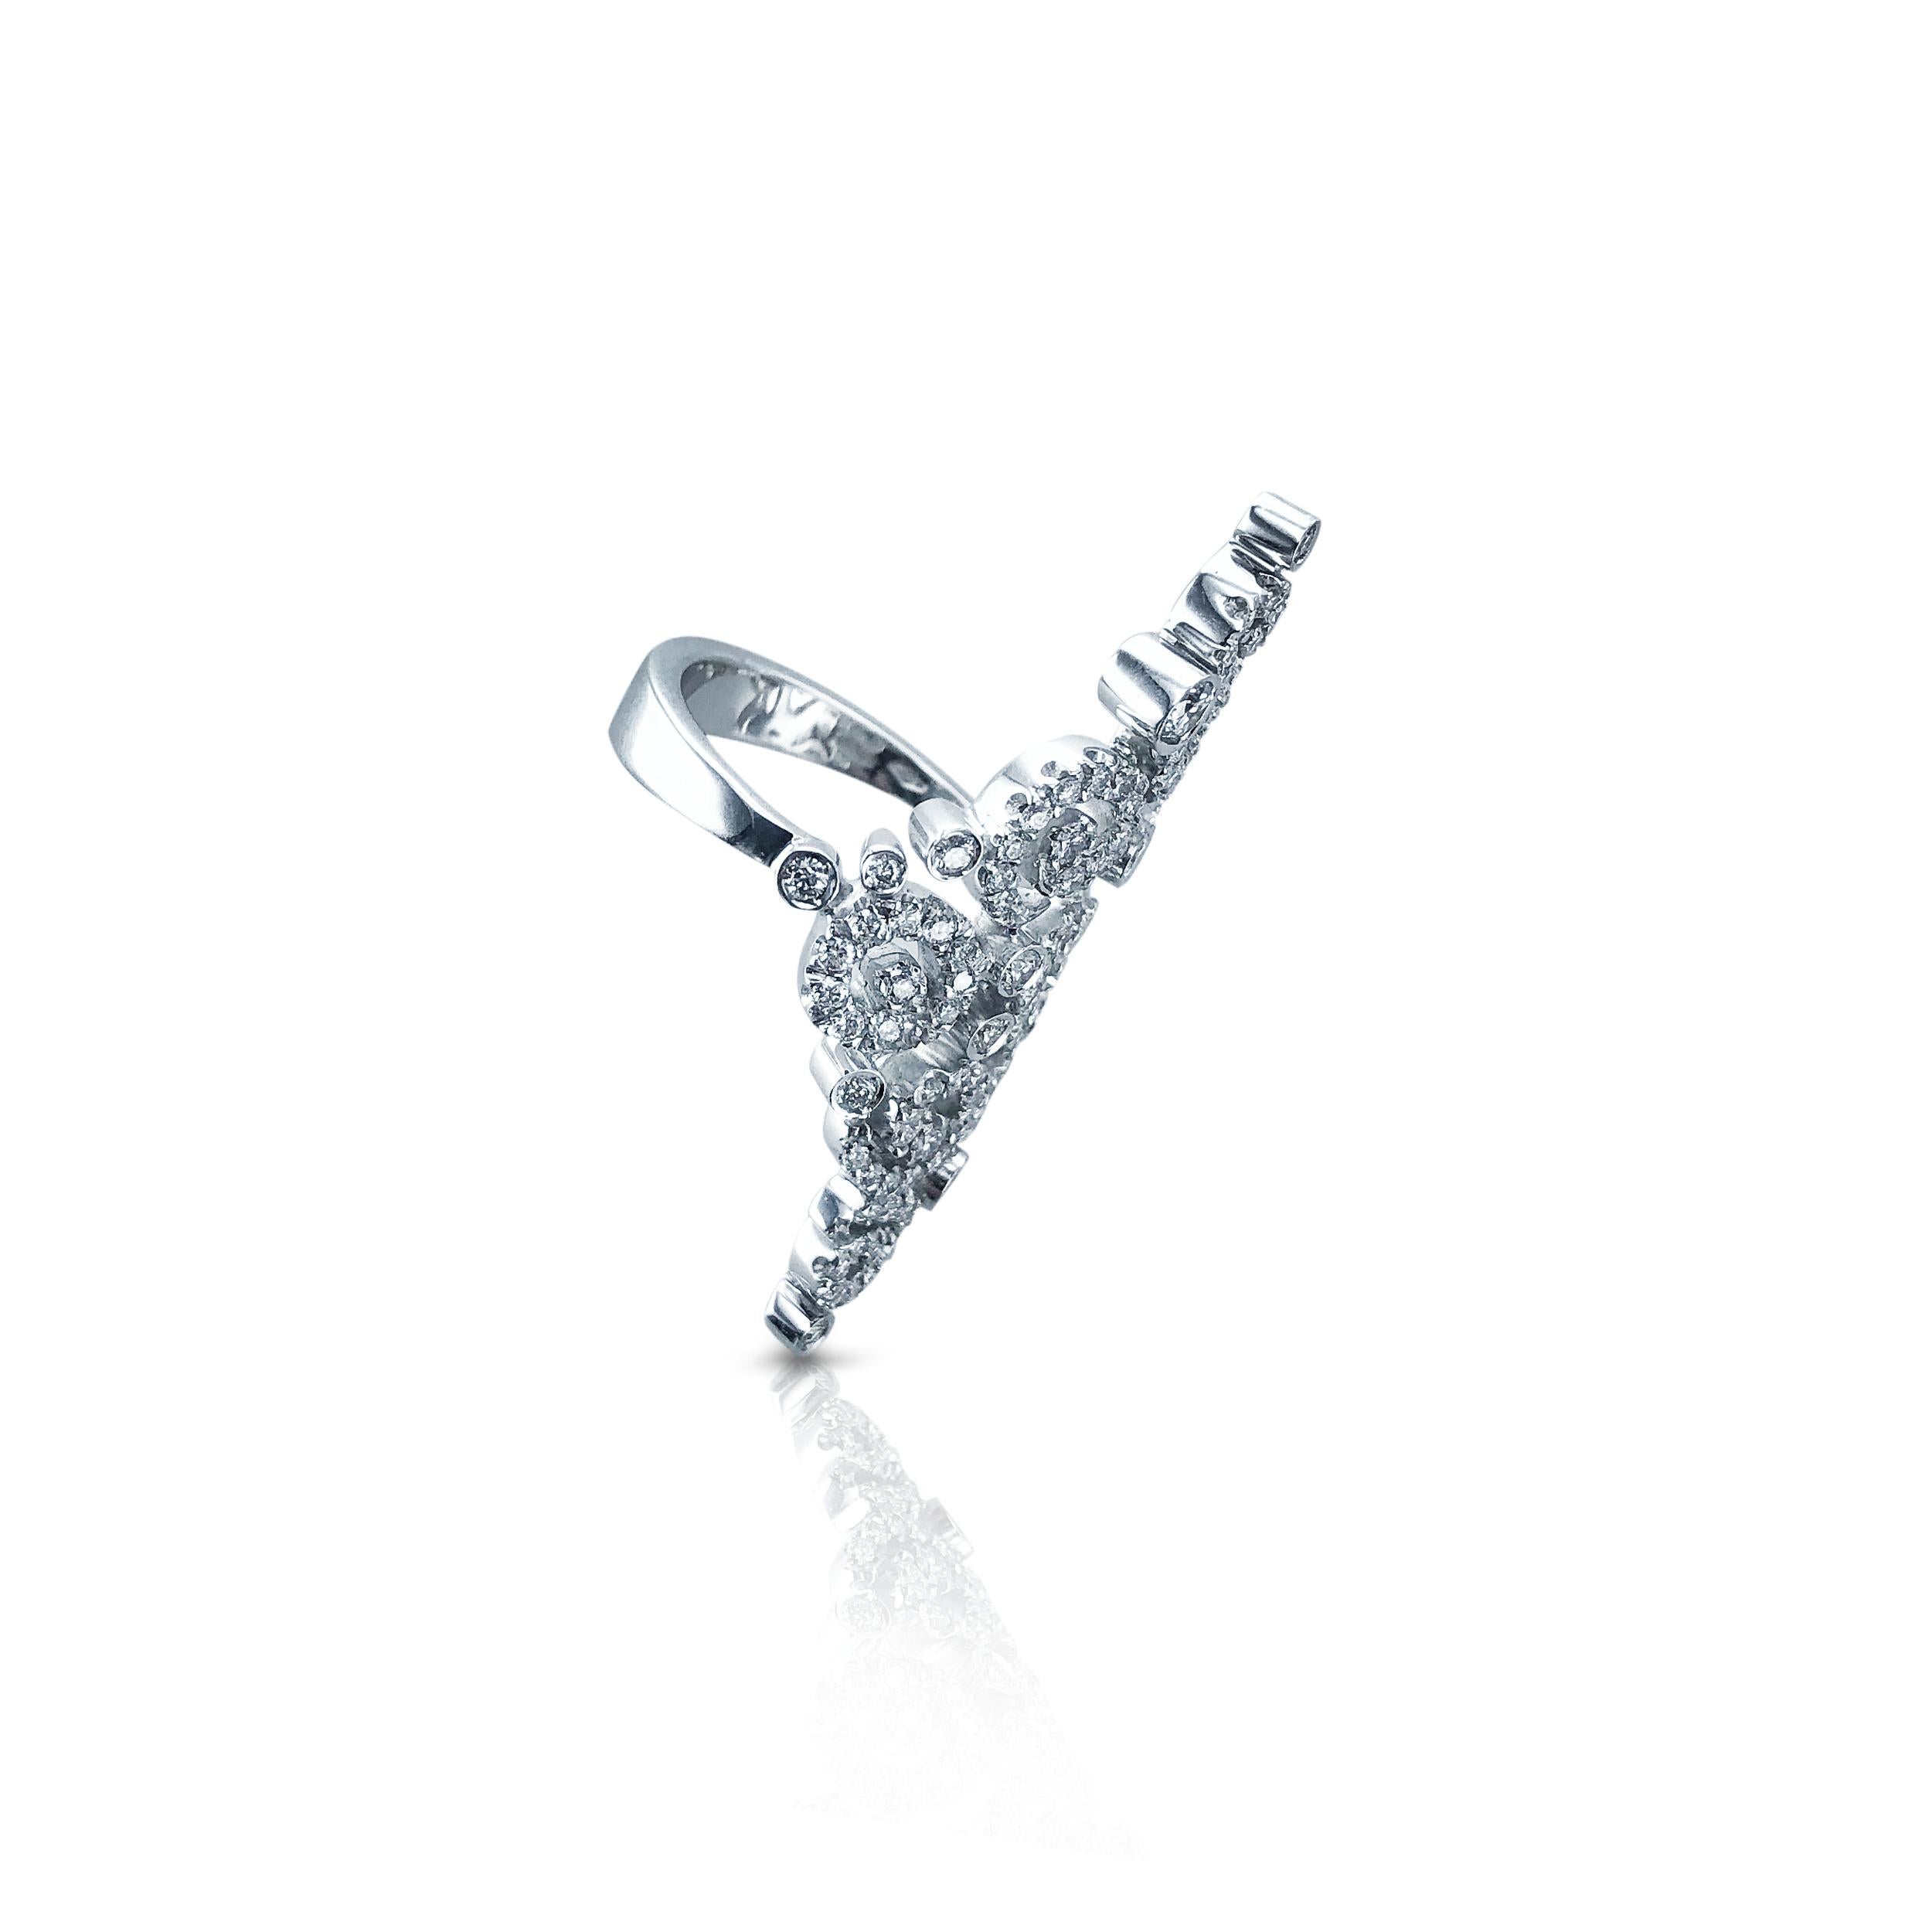 This Stefan Hafner 1.22 carats large Diamond ring is set in 18kt white Gold. 
With intricate designs and multiple swirls it dresses the finger in a unique and striking way. 
Designed with a pointed finish it lengthens the finger, empowering it with